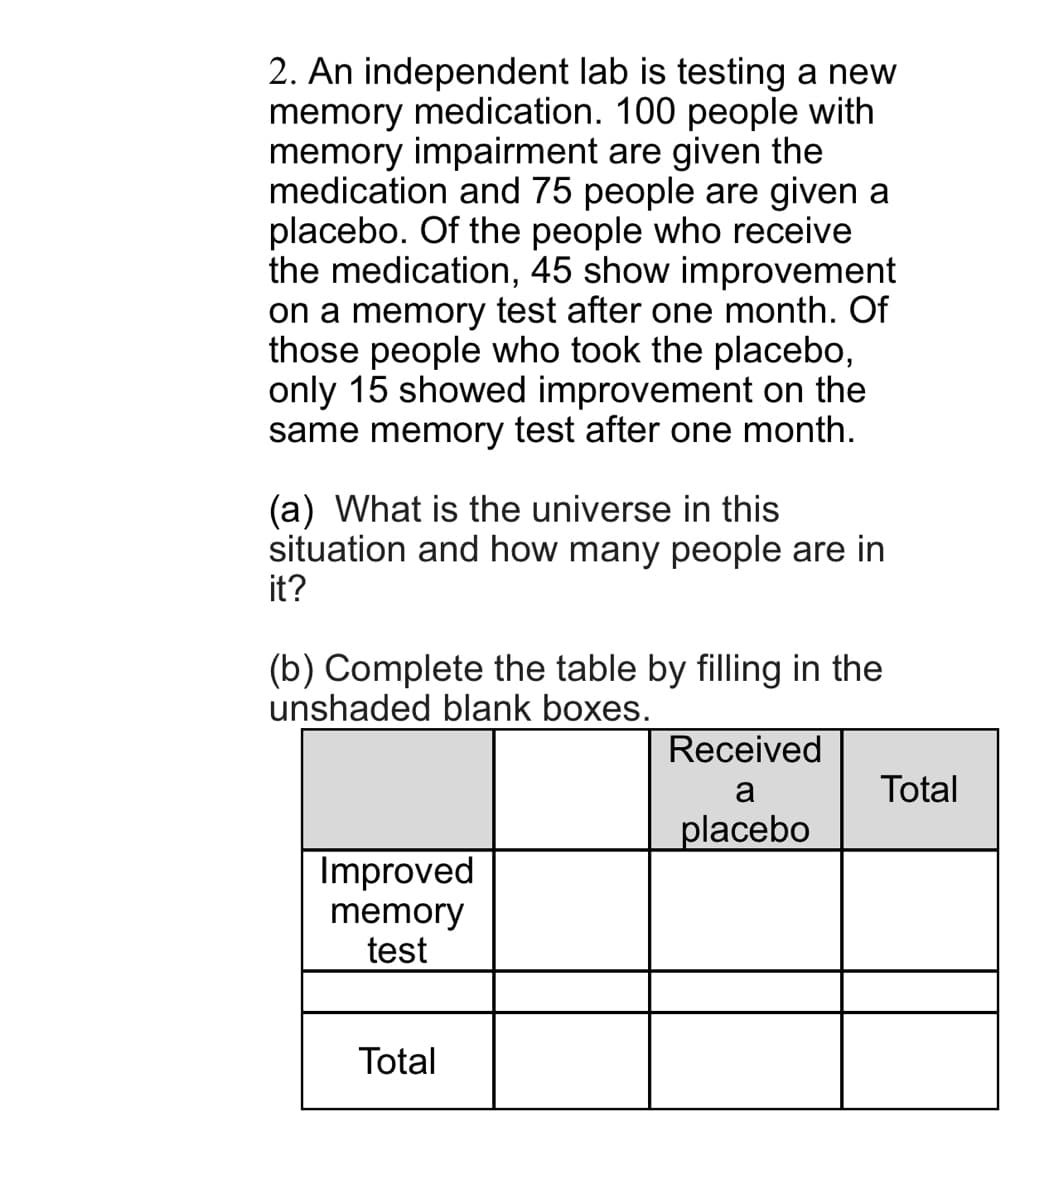 2. An independent lab is testing a new
memory medication. 100 people with
memory impairment are given the
medication and 75 people are given a
placebo. Of the people who receive
the medication, 45 show improvement
on a memory test after one month. Of
those people who took the placebo,
only 15 showed improvement on the
same memory test after one month.
(a) What is the universe in this
situation and how many people are in
it?
(b) Complete the table by filling in the
unshaded blank boxes.
Received
a
Total
placebo
Improved
memory
test
Total
